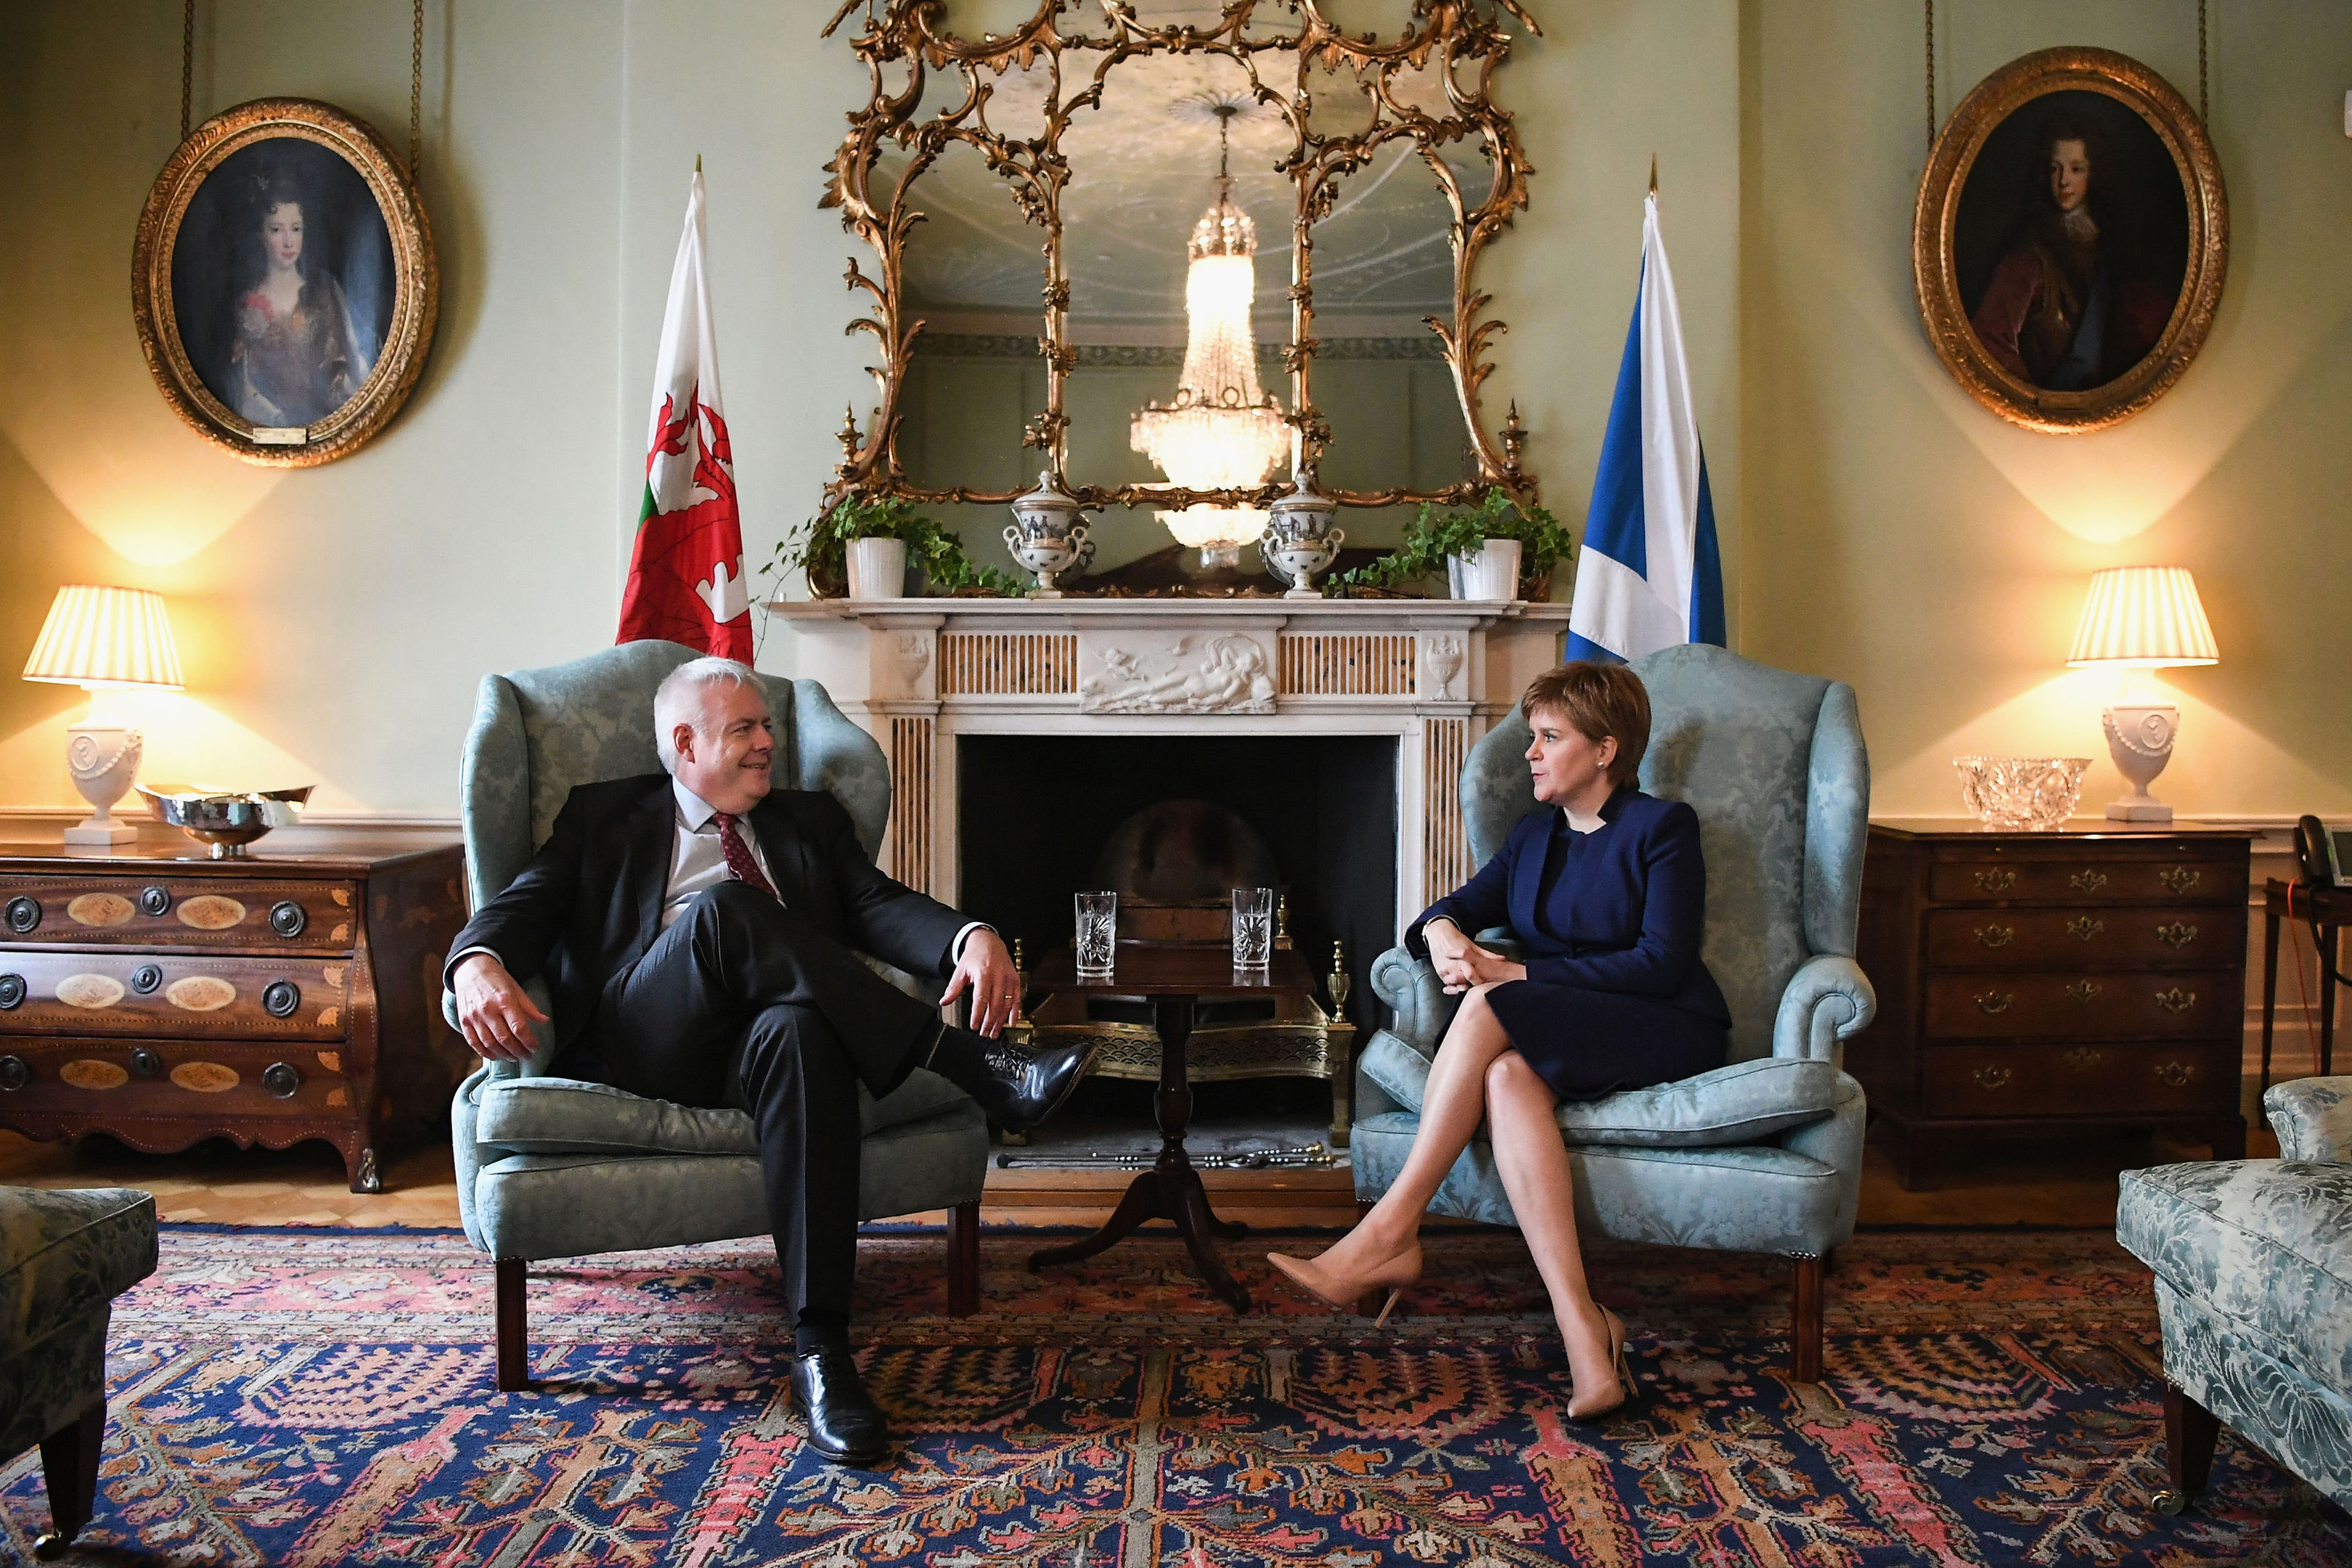 Scotland's First Minister Nicola Sturgeon and her Welsh counterpart Carwyn Jones meeting at Bute House in Edinburgh to discuss their opposition to the Brexit repeal Bill (Jeff J Mitchell/PA Wire)